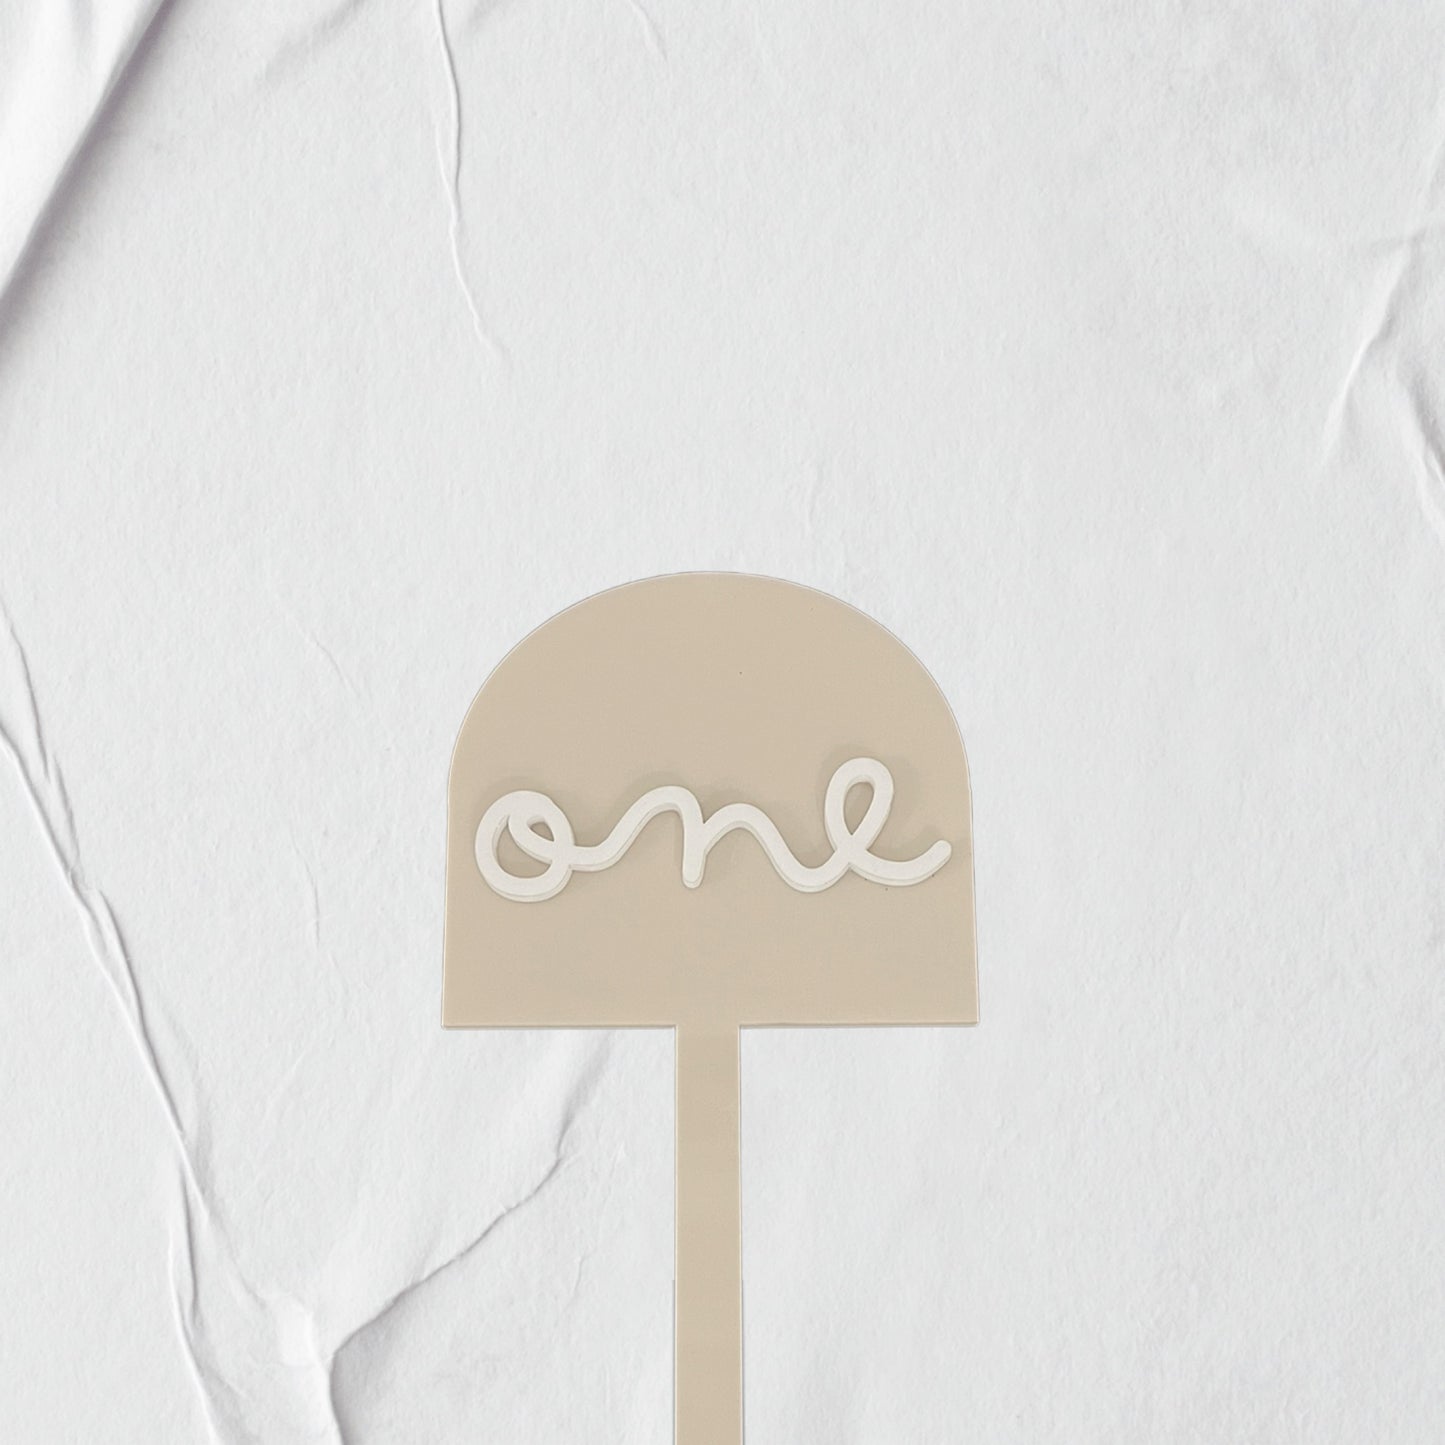 'one' Cake Topper - neutral gender acrylic